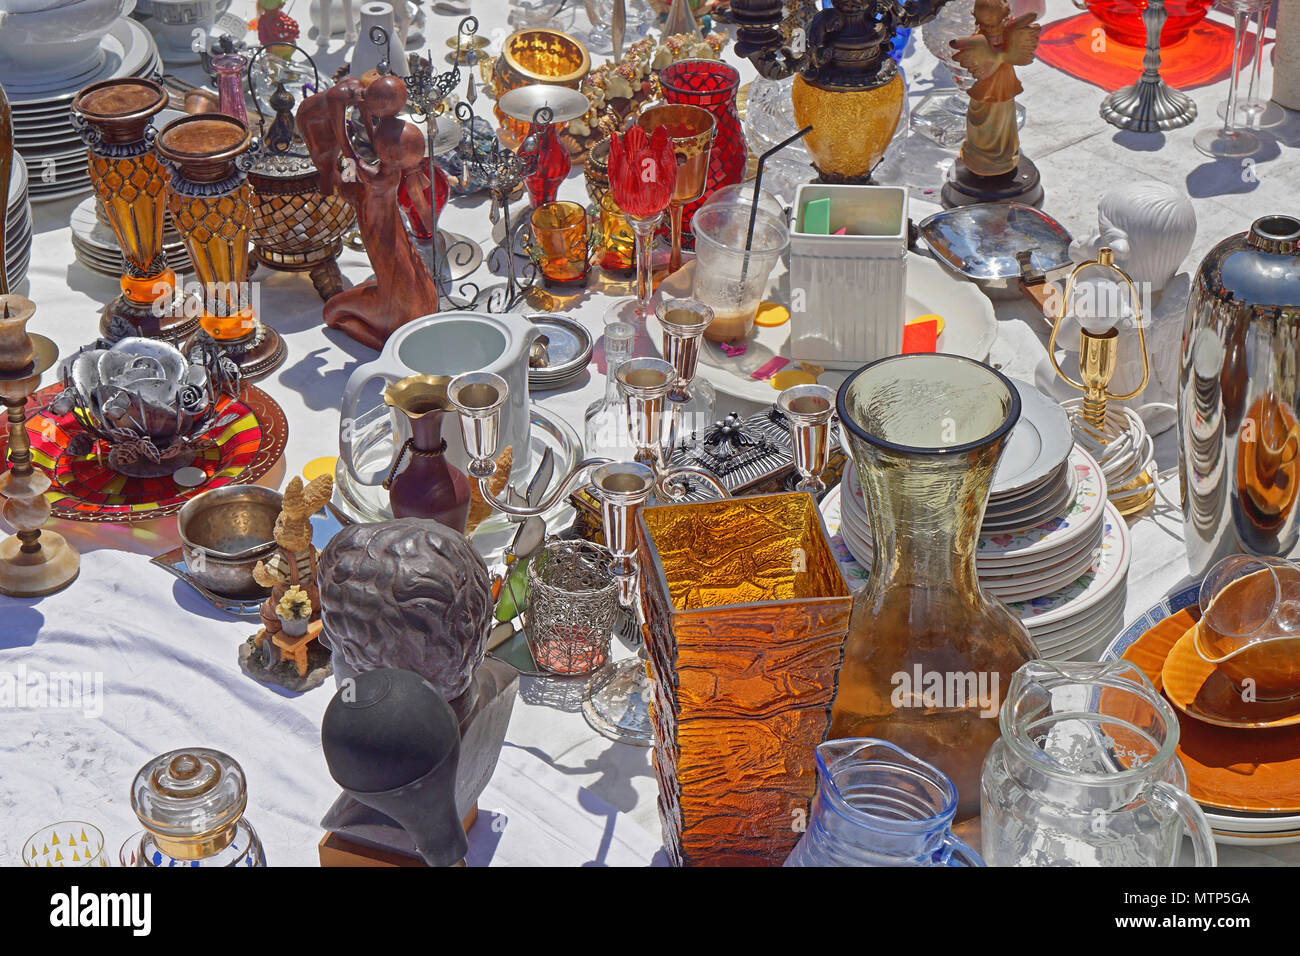 Antiquities at Flea Market, Selection of Vintage Things, Antique Stuff  Stock Image - Image of antique, collection: 254786517